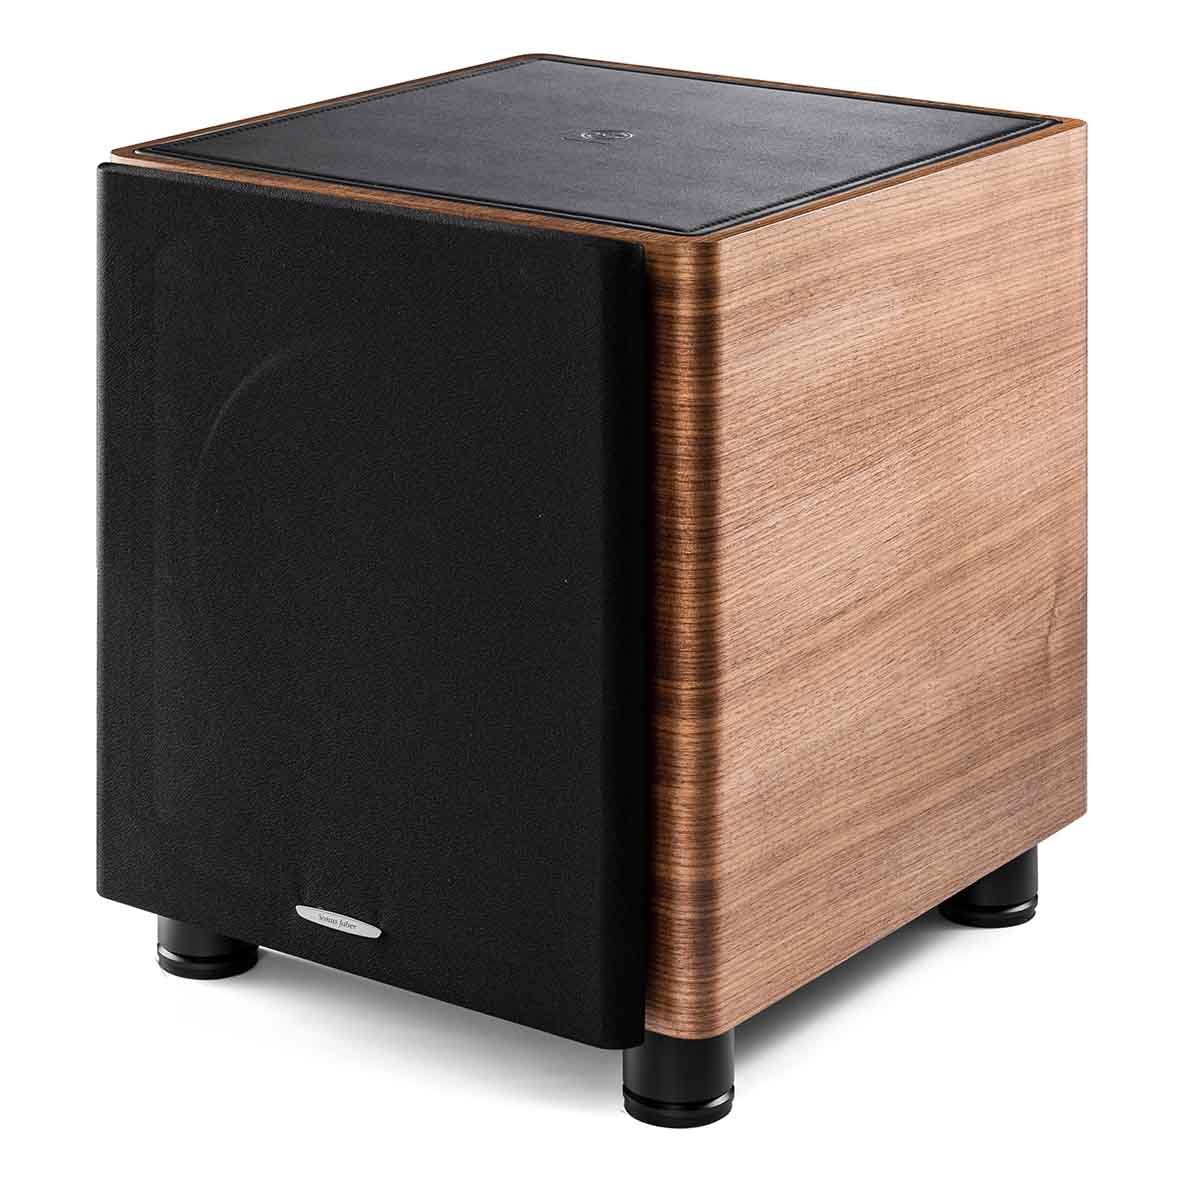 Sonus Faber Gravis II 10" Powered Subwoofer wood angled front view with grille